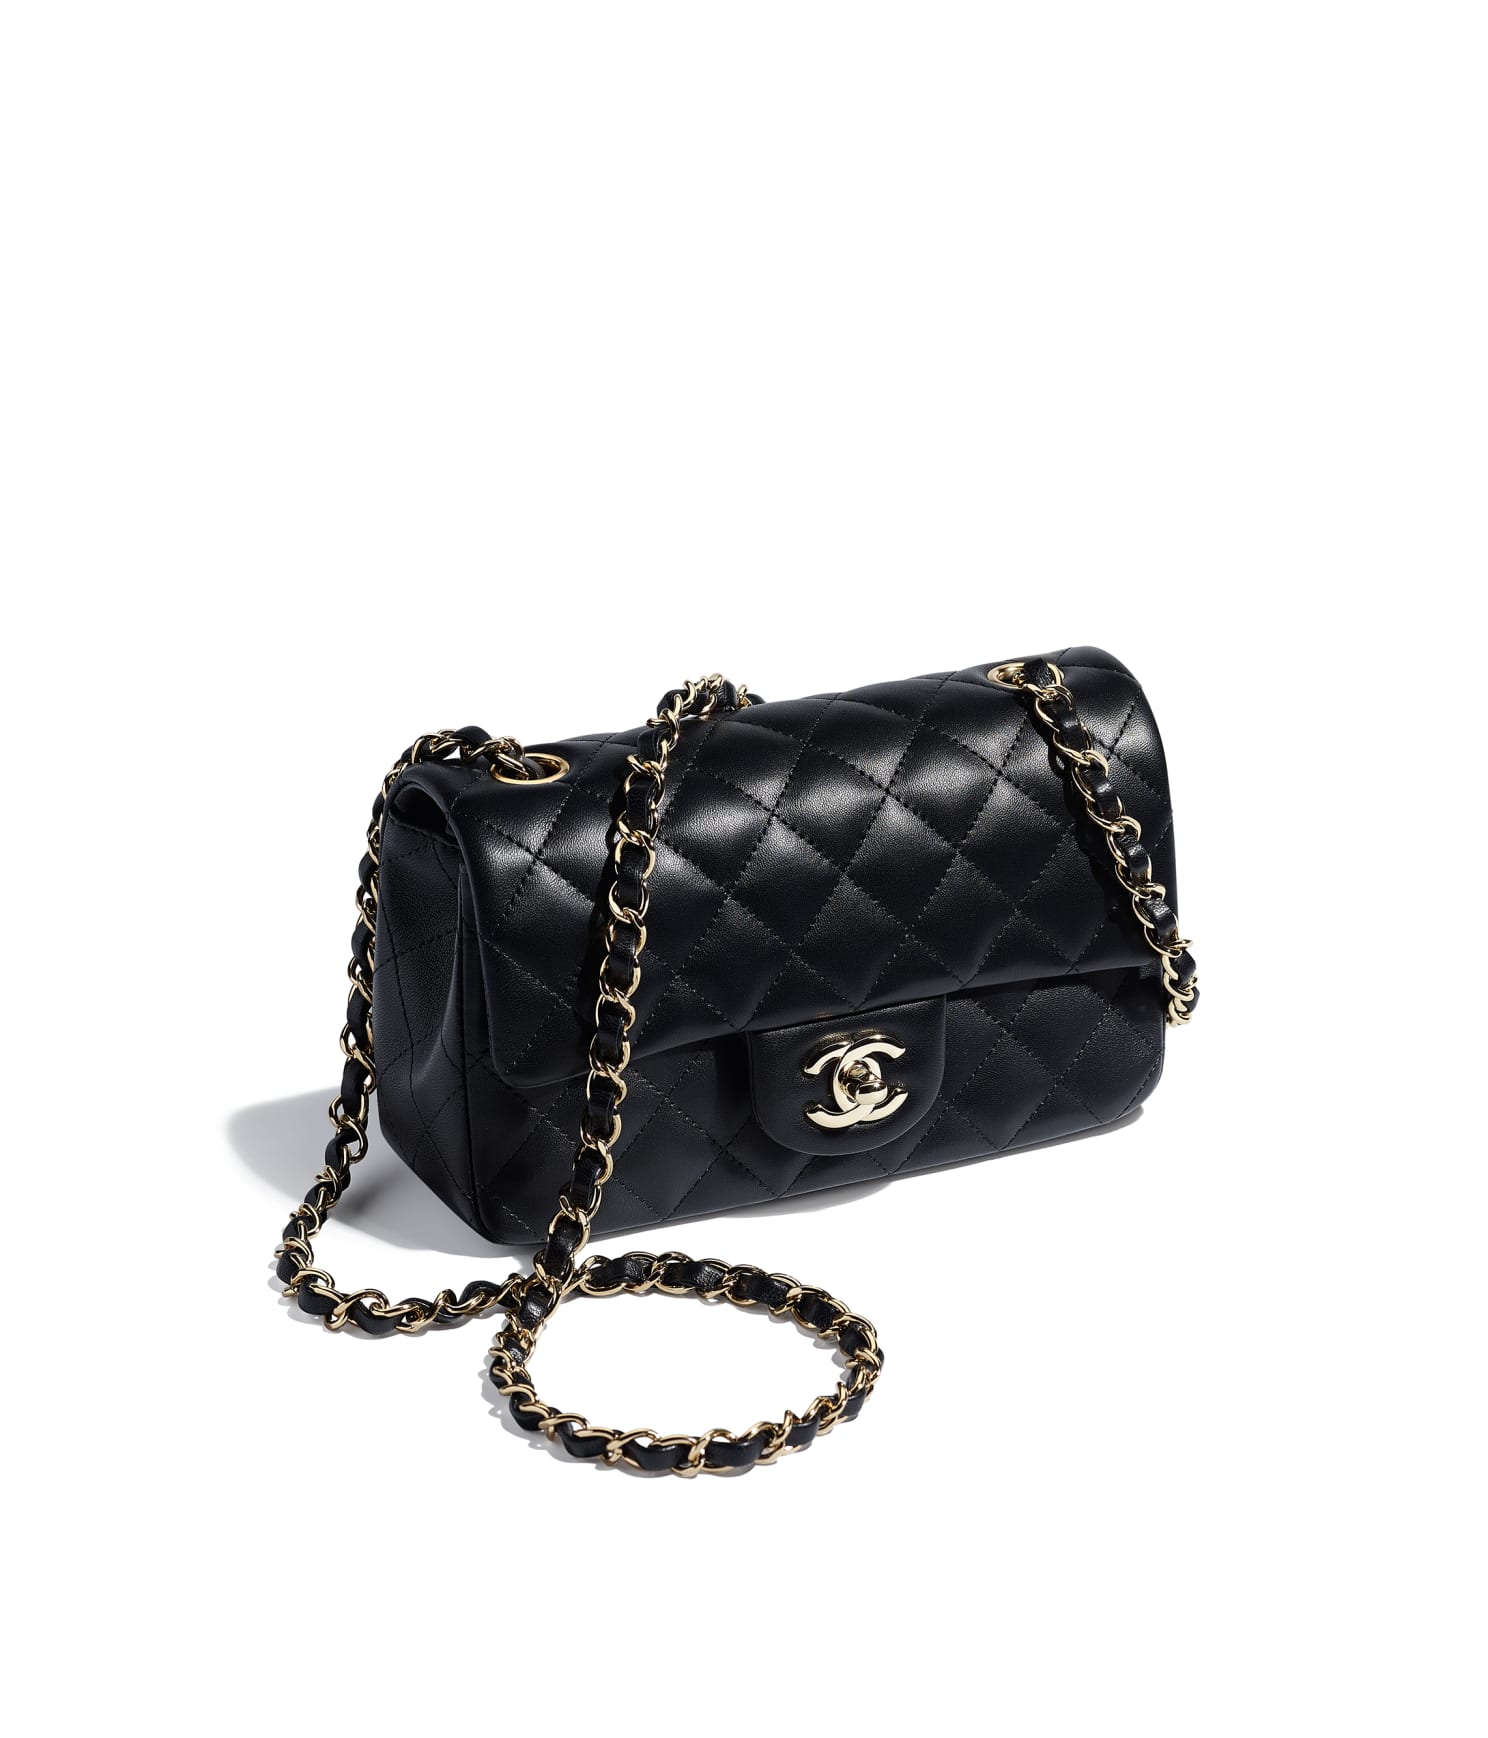 Chanel Increased Price of Medium Classic Flap Bag by 72 Percent in 6 Years   The Hollywood Reporter